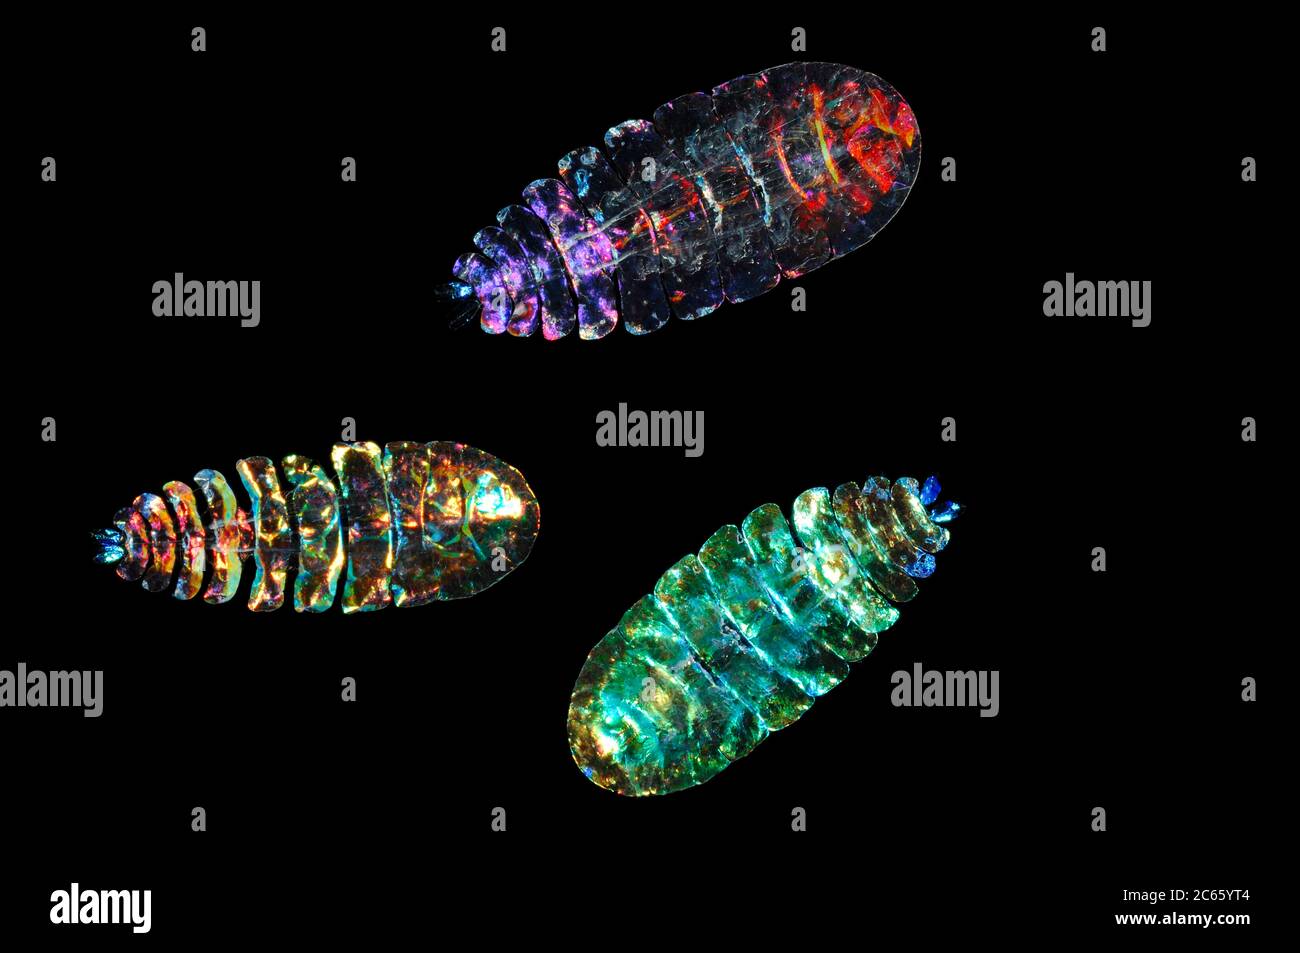 captive Marine Planktonic Copepod (Sapphirina sp.) Sapphirina, also called the sea sapphires is a copepod how is diffracting light with his exoskeleton. Atlantic Ocean, close to Cape Verde Stock Photo